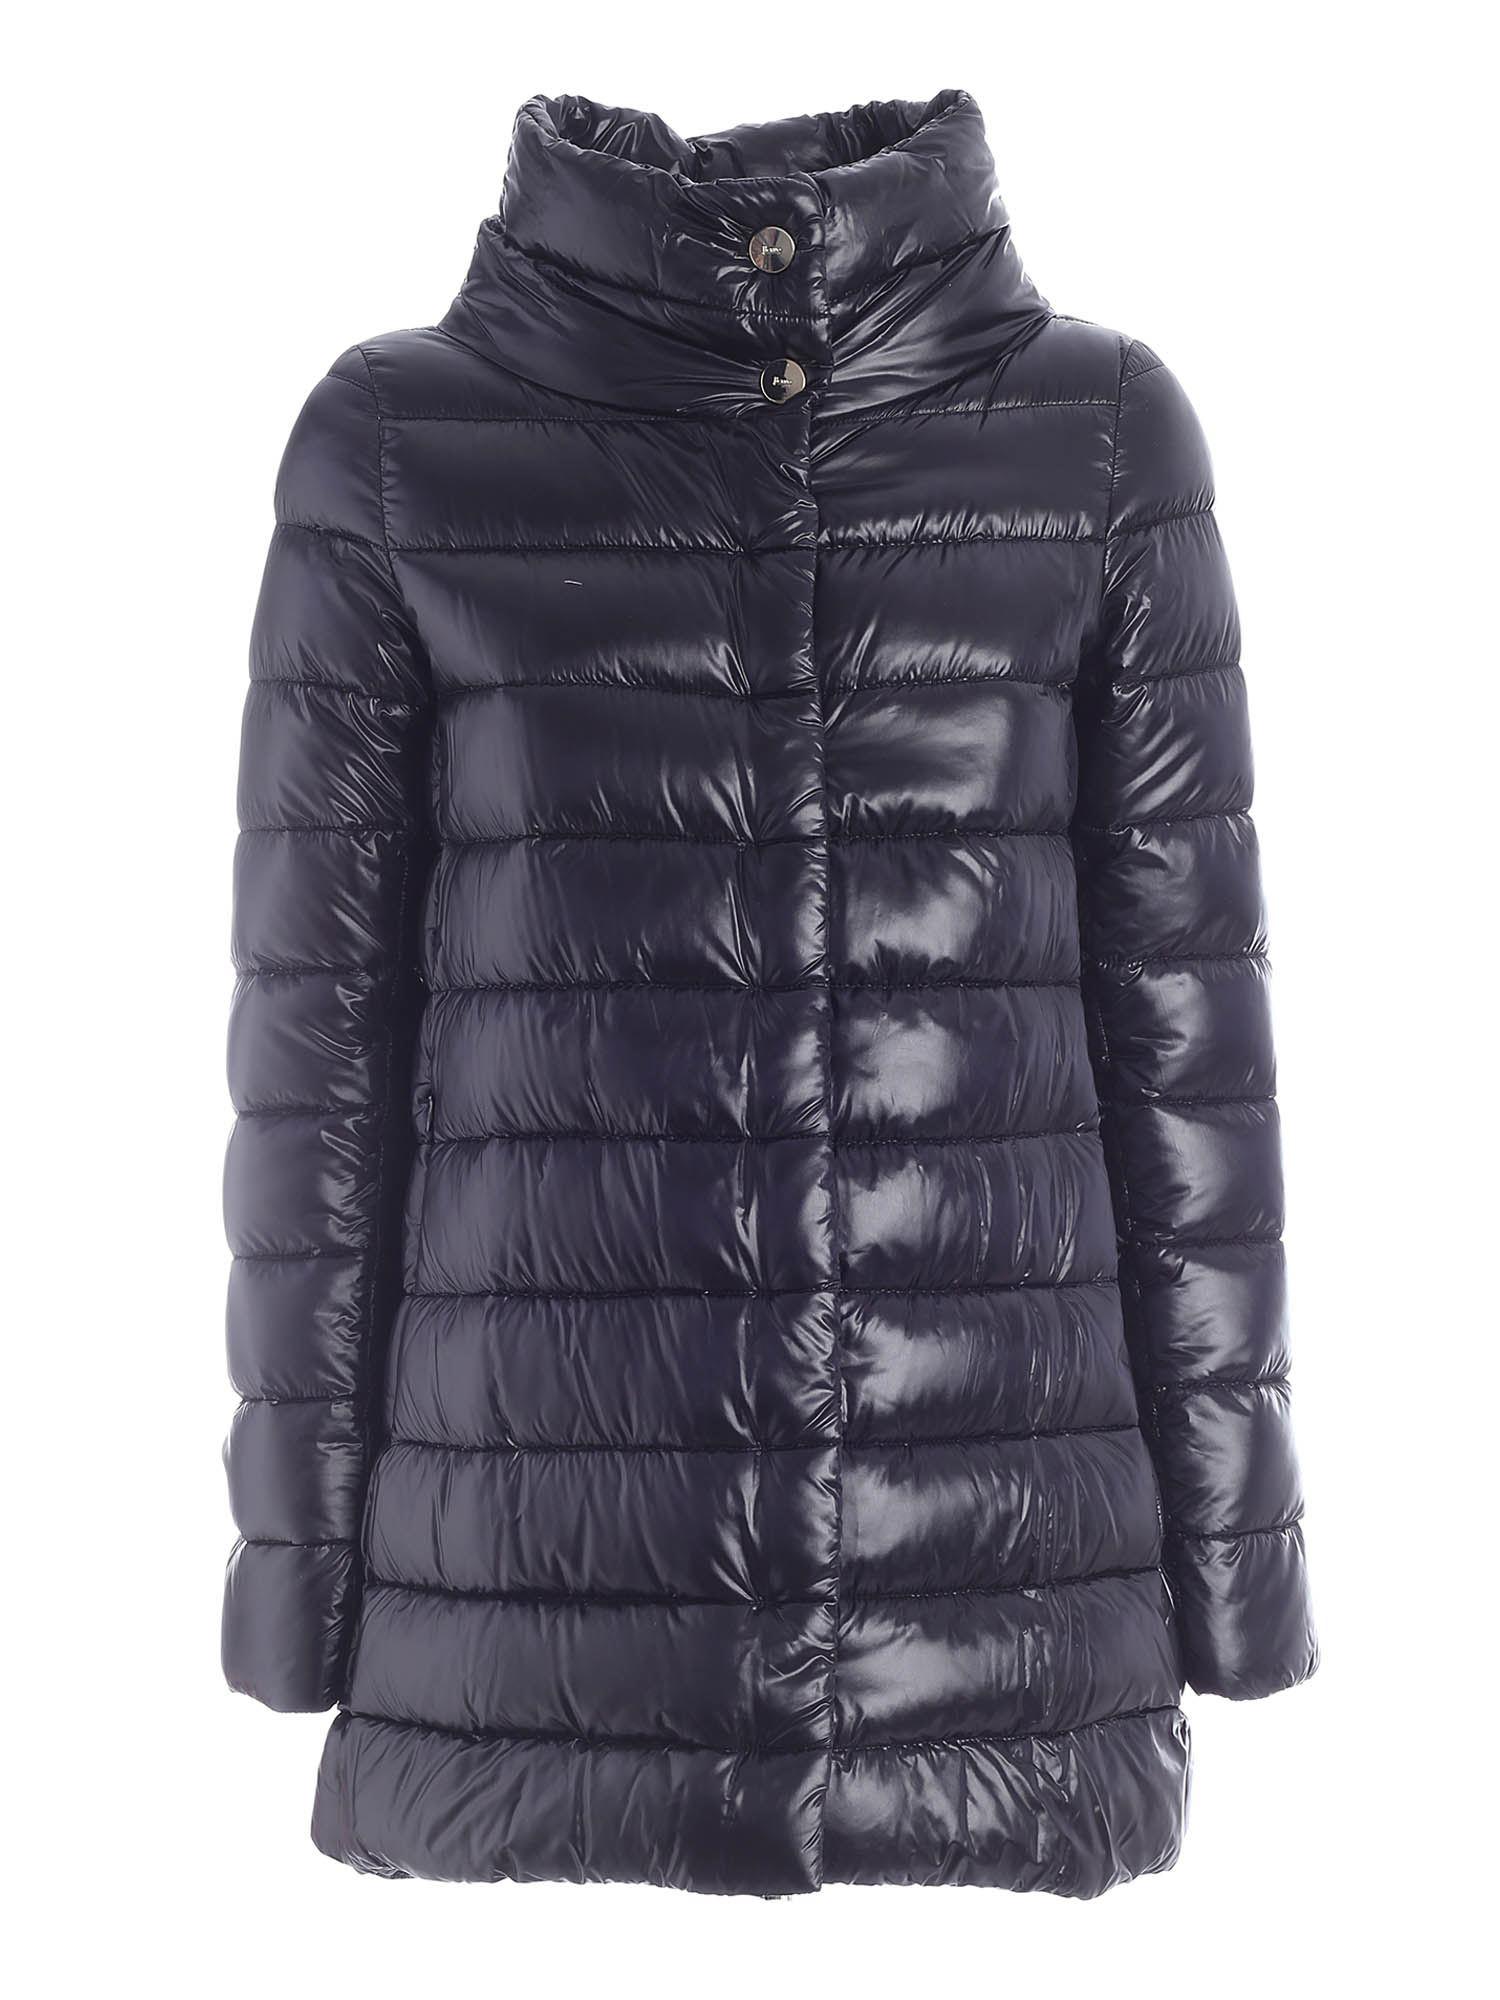 Herno Synthetic Iconico Amelia Down Jacket in Black - Lyst